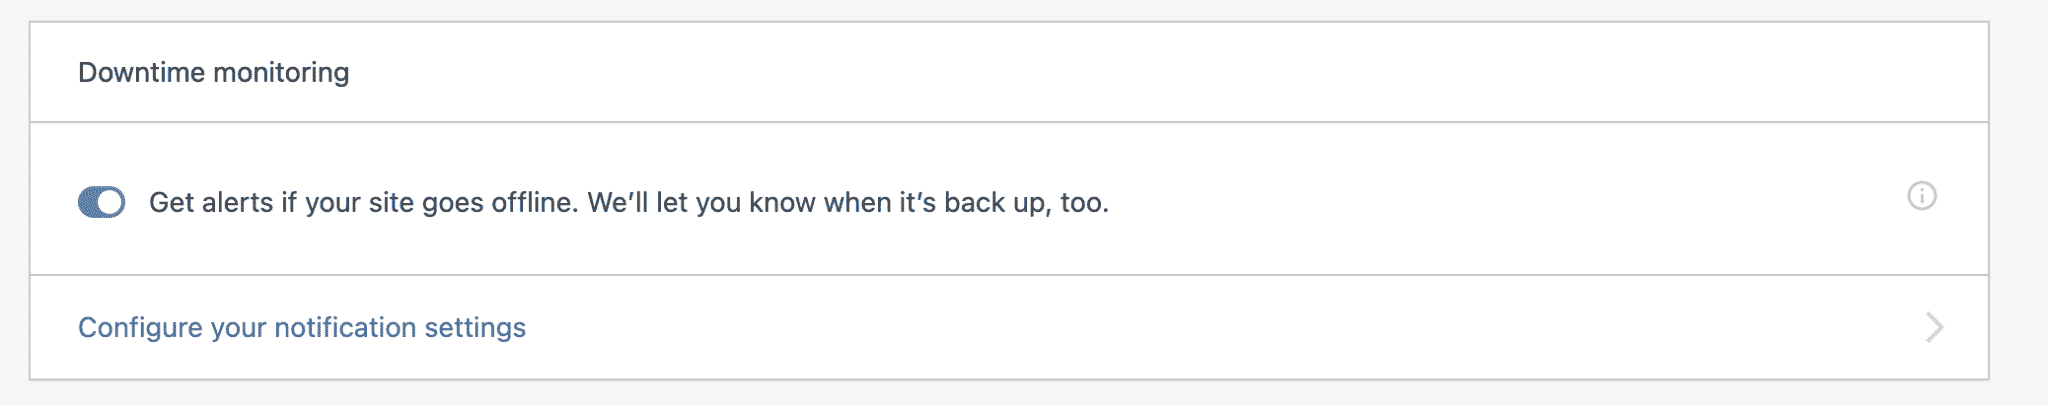 Jetpack’s Downtime monitoring module lets you know when your site is down. 